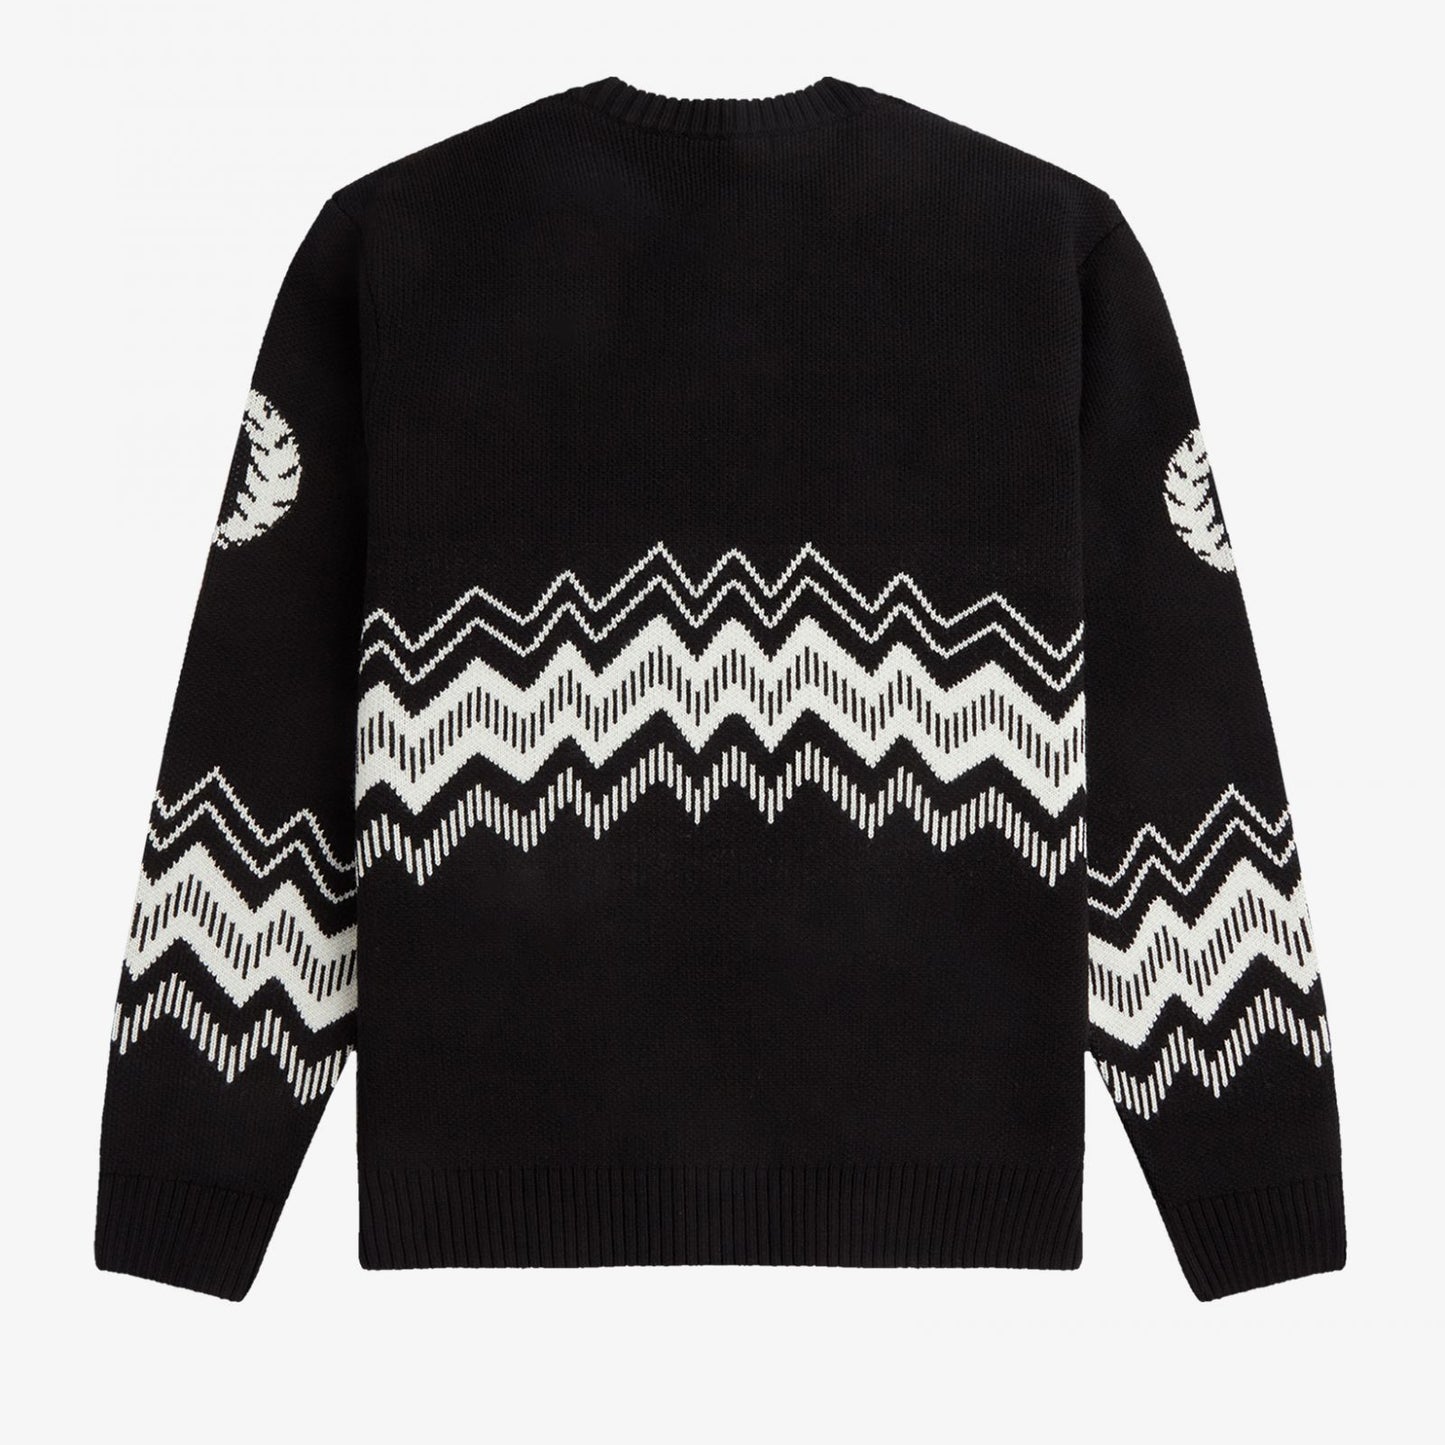 Fred Perry Jacquard Crew Neck Jumper